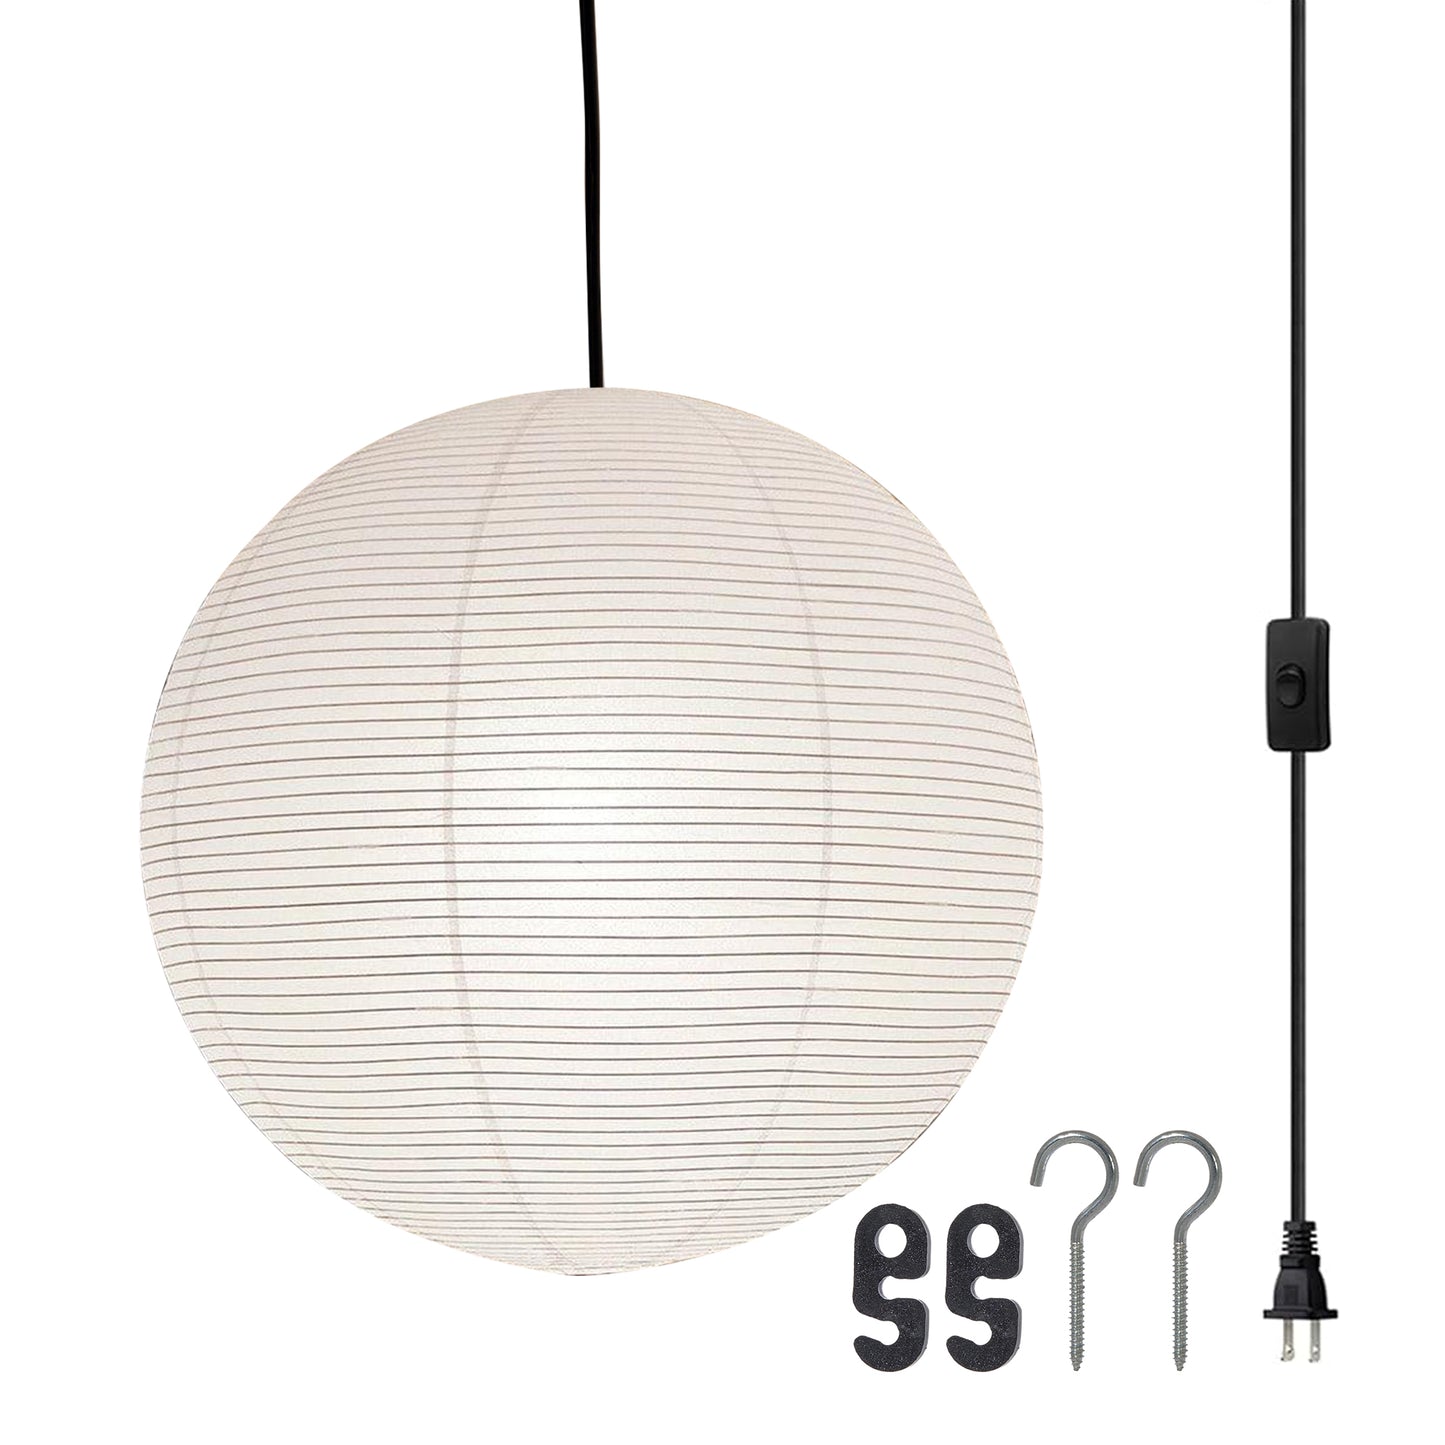 White Paper Pendant - Akari Rice Paper Pendant (No bulb included) - All Sizes Available